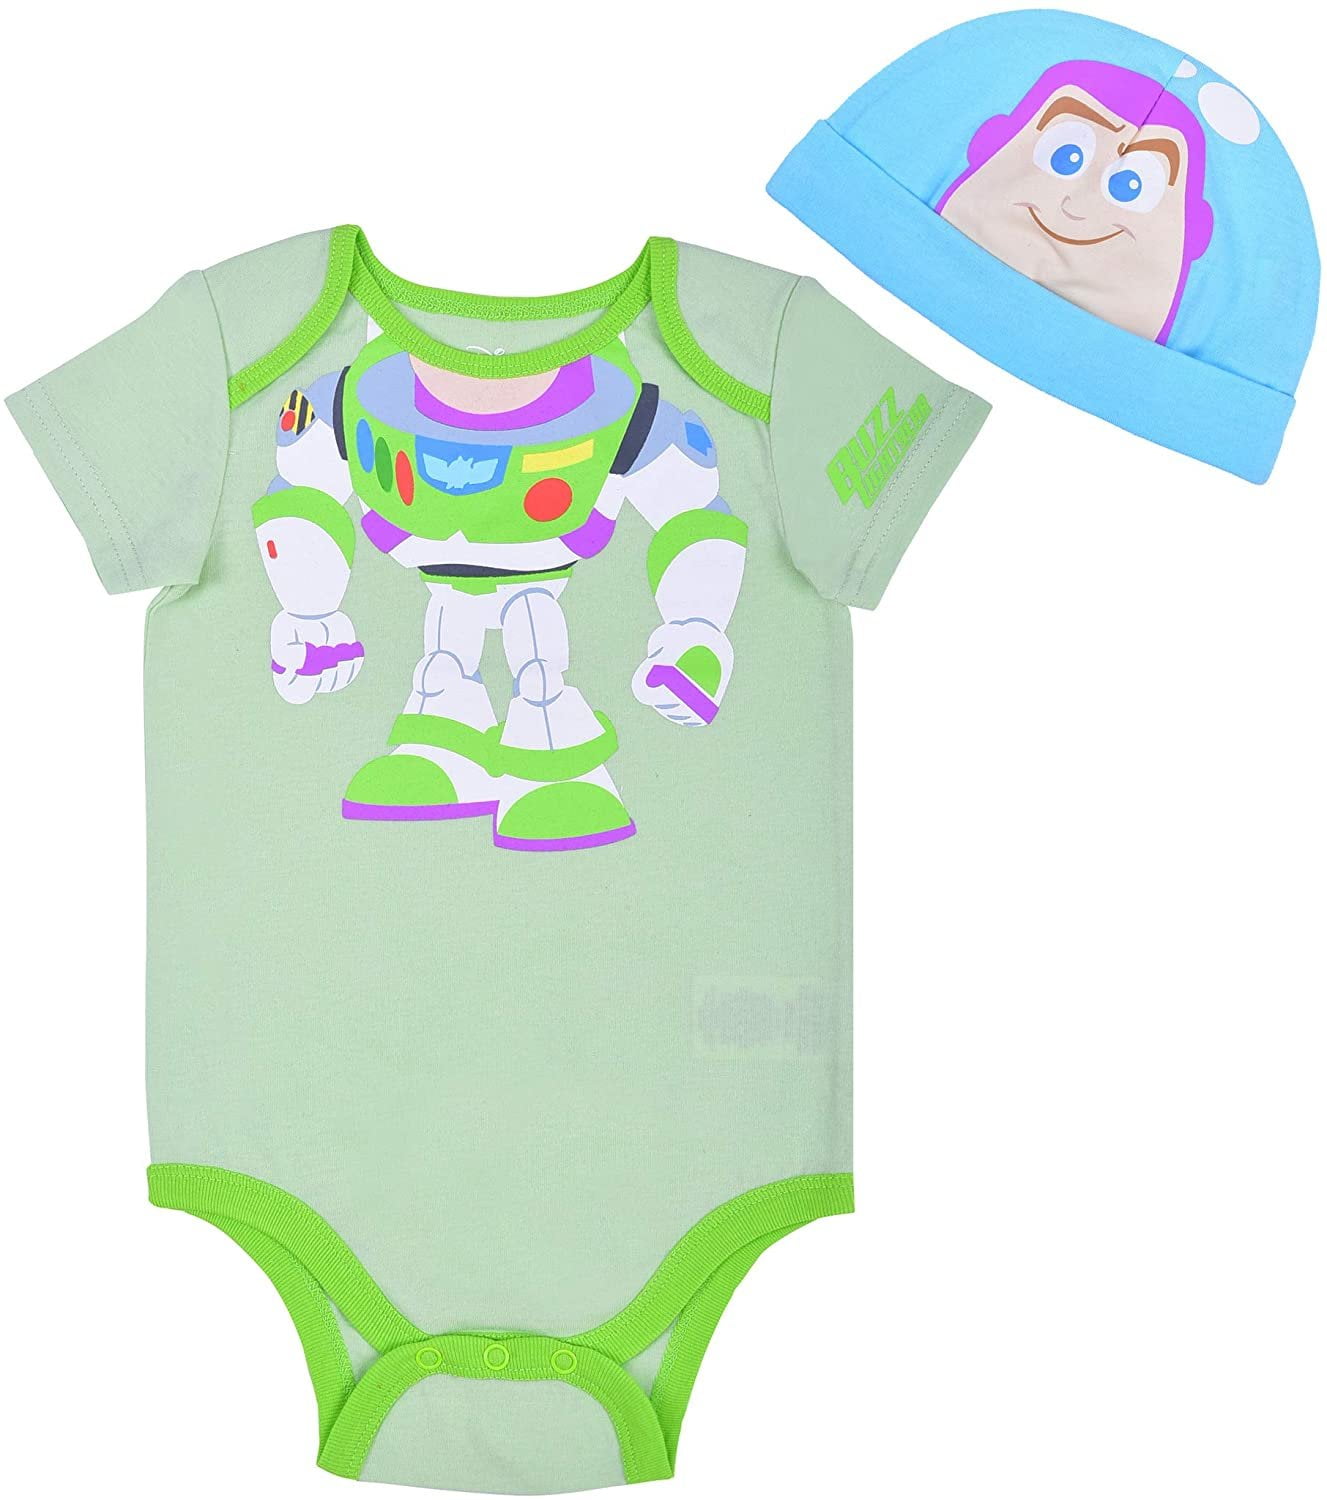 ALIEN TOY STORY Personalised Baby Vest Disney Baby Bodysuit Romper Toy Story Alien Birthday Outfit Personalized Baby Vest Sleepsuit